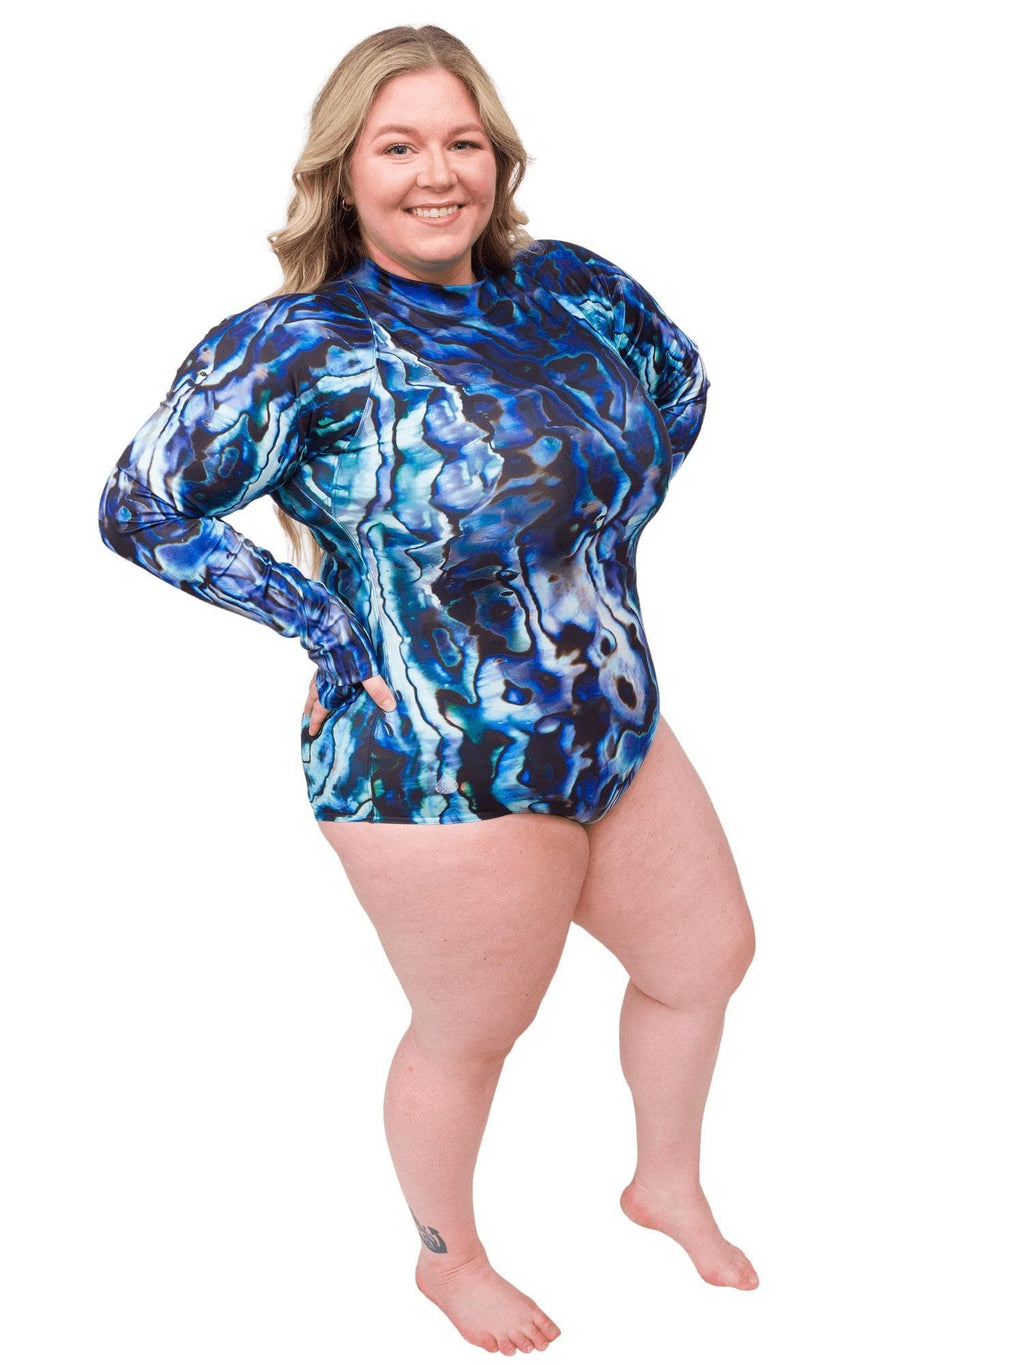 Abalone Dive Skin, Surf Suit